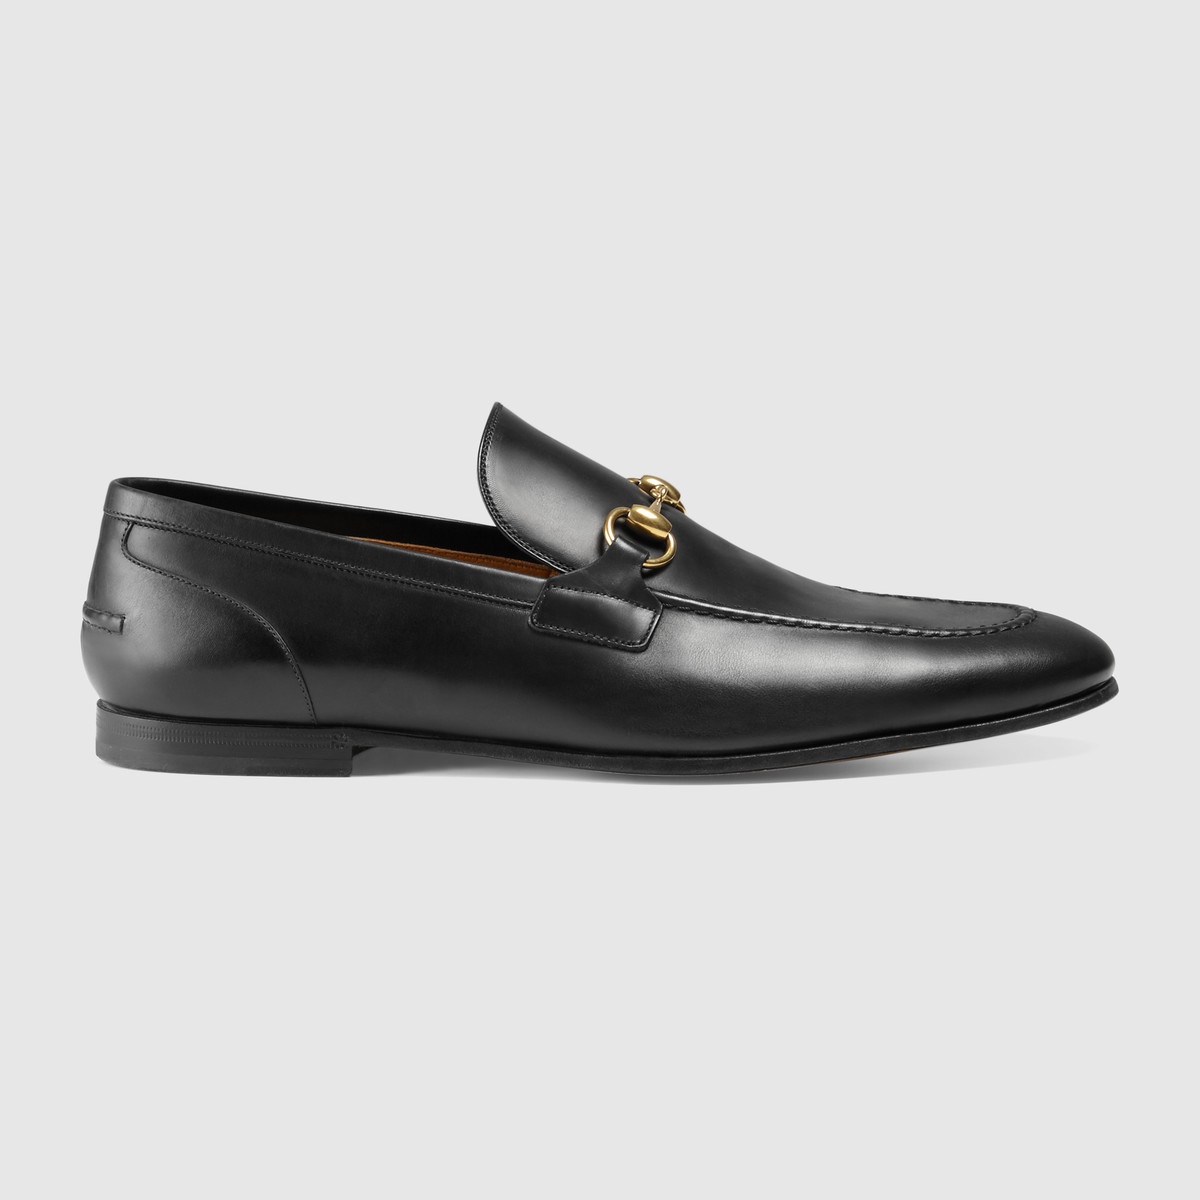 Gucci Jordaan leather loafer - 1